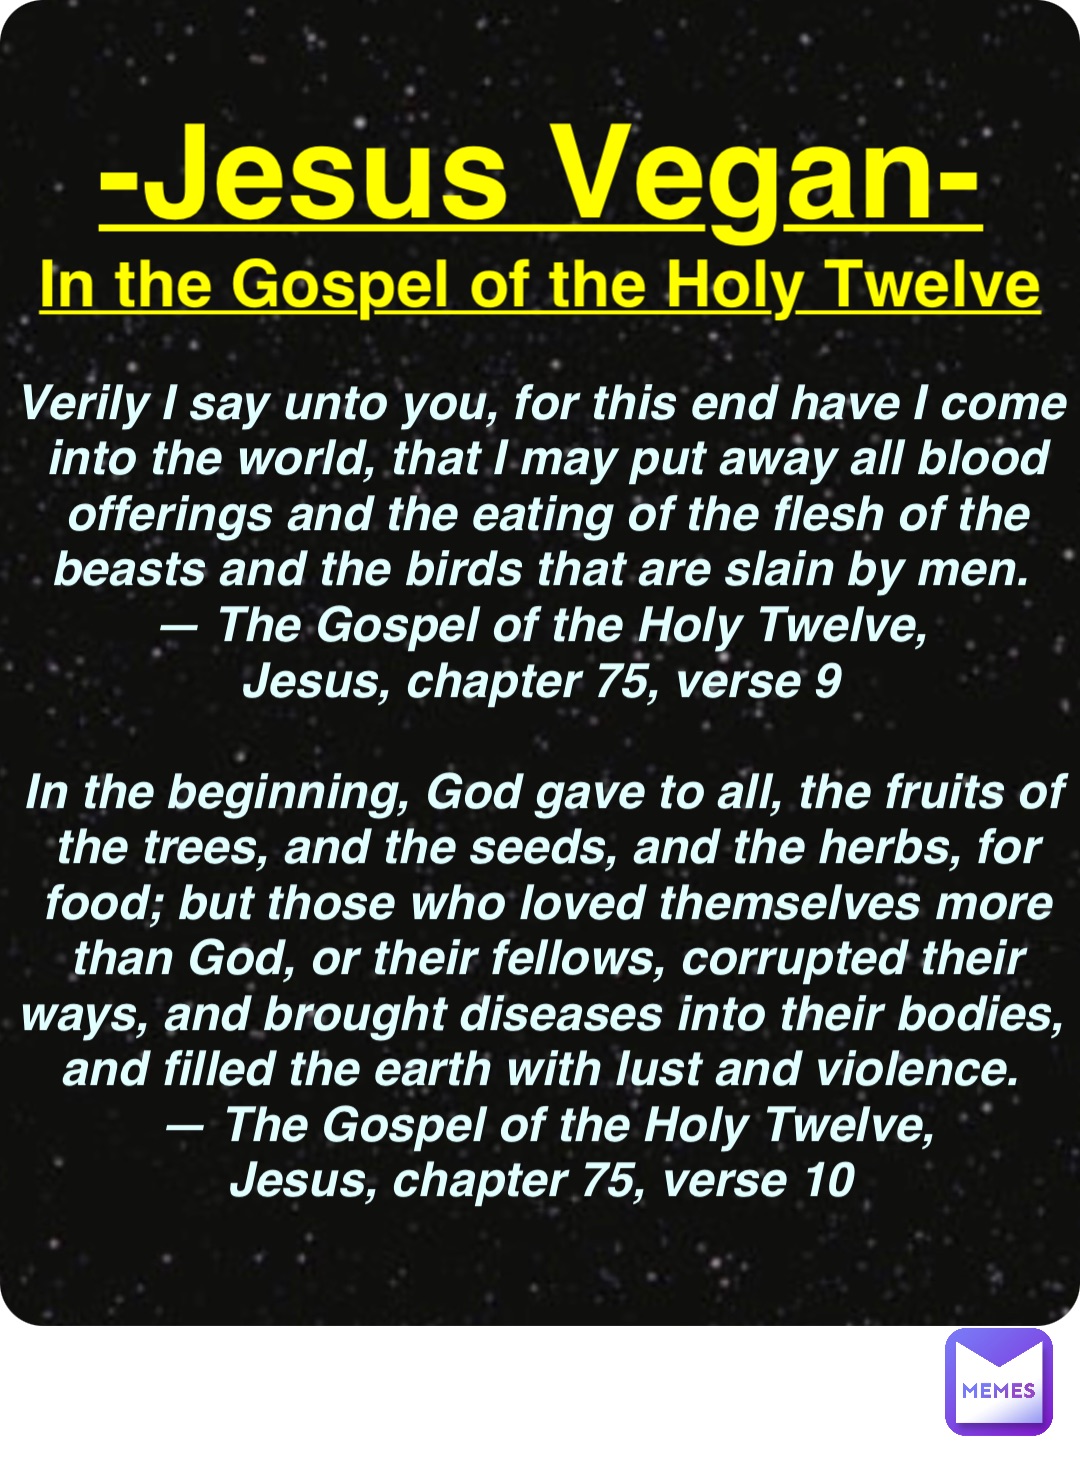 Double tap to edit -Jesus Vegan- In the Gospel of the Holy Twelve Verily I say unto you, for this end have I come into the world, that I may put away all blood offerings and the eating of the flesh of the beasts and the birds that are slain by men.
— The Gospel of the Holy Twelve,
Jesus, chapter 75, verse 9

In the beginning, God gave to all, the fruits of the trees, and the seeds, and the herbs, for food; but those who loved themselves more than God, or their fellows, corrupted their ways, and brought diseases into their bodies, and filled the earth with lust and violence.
— The Gospel of the Holy Twelve, 
Jesus, chapter 75, verse 10